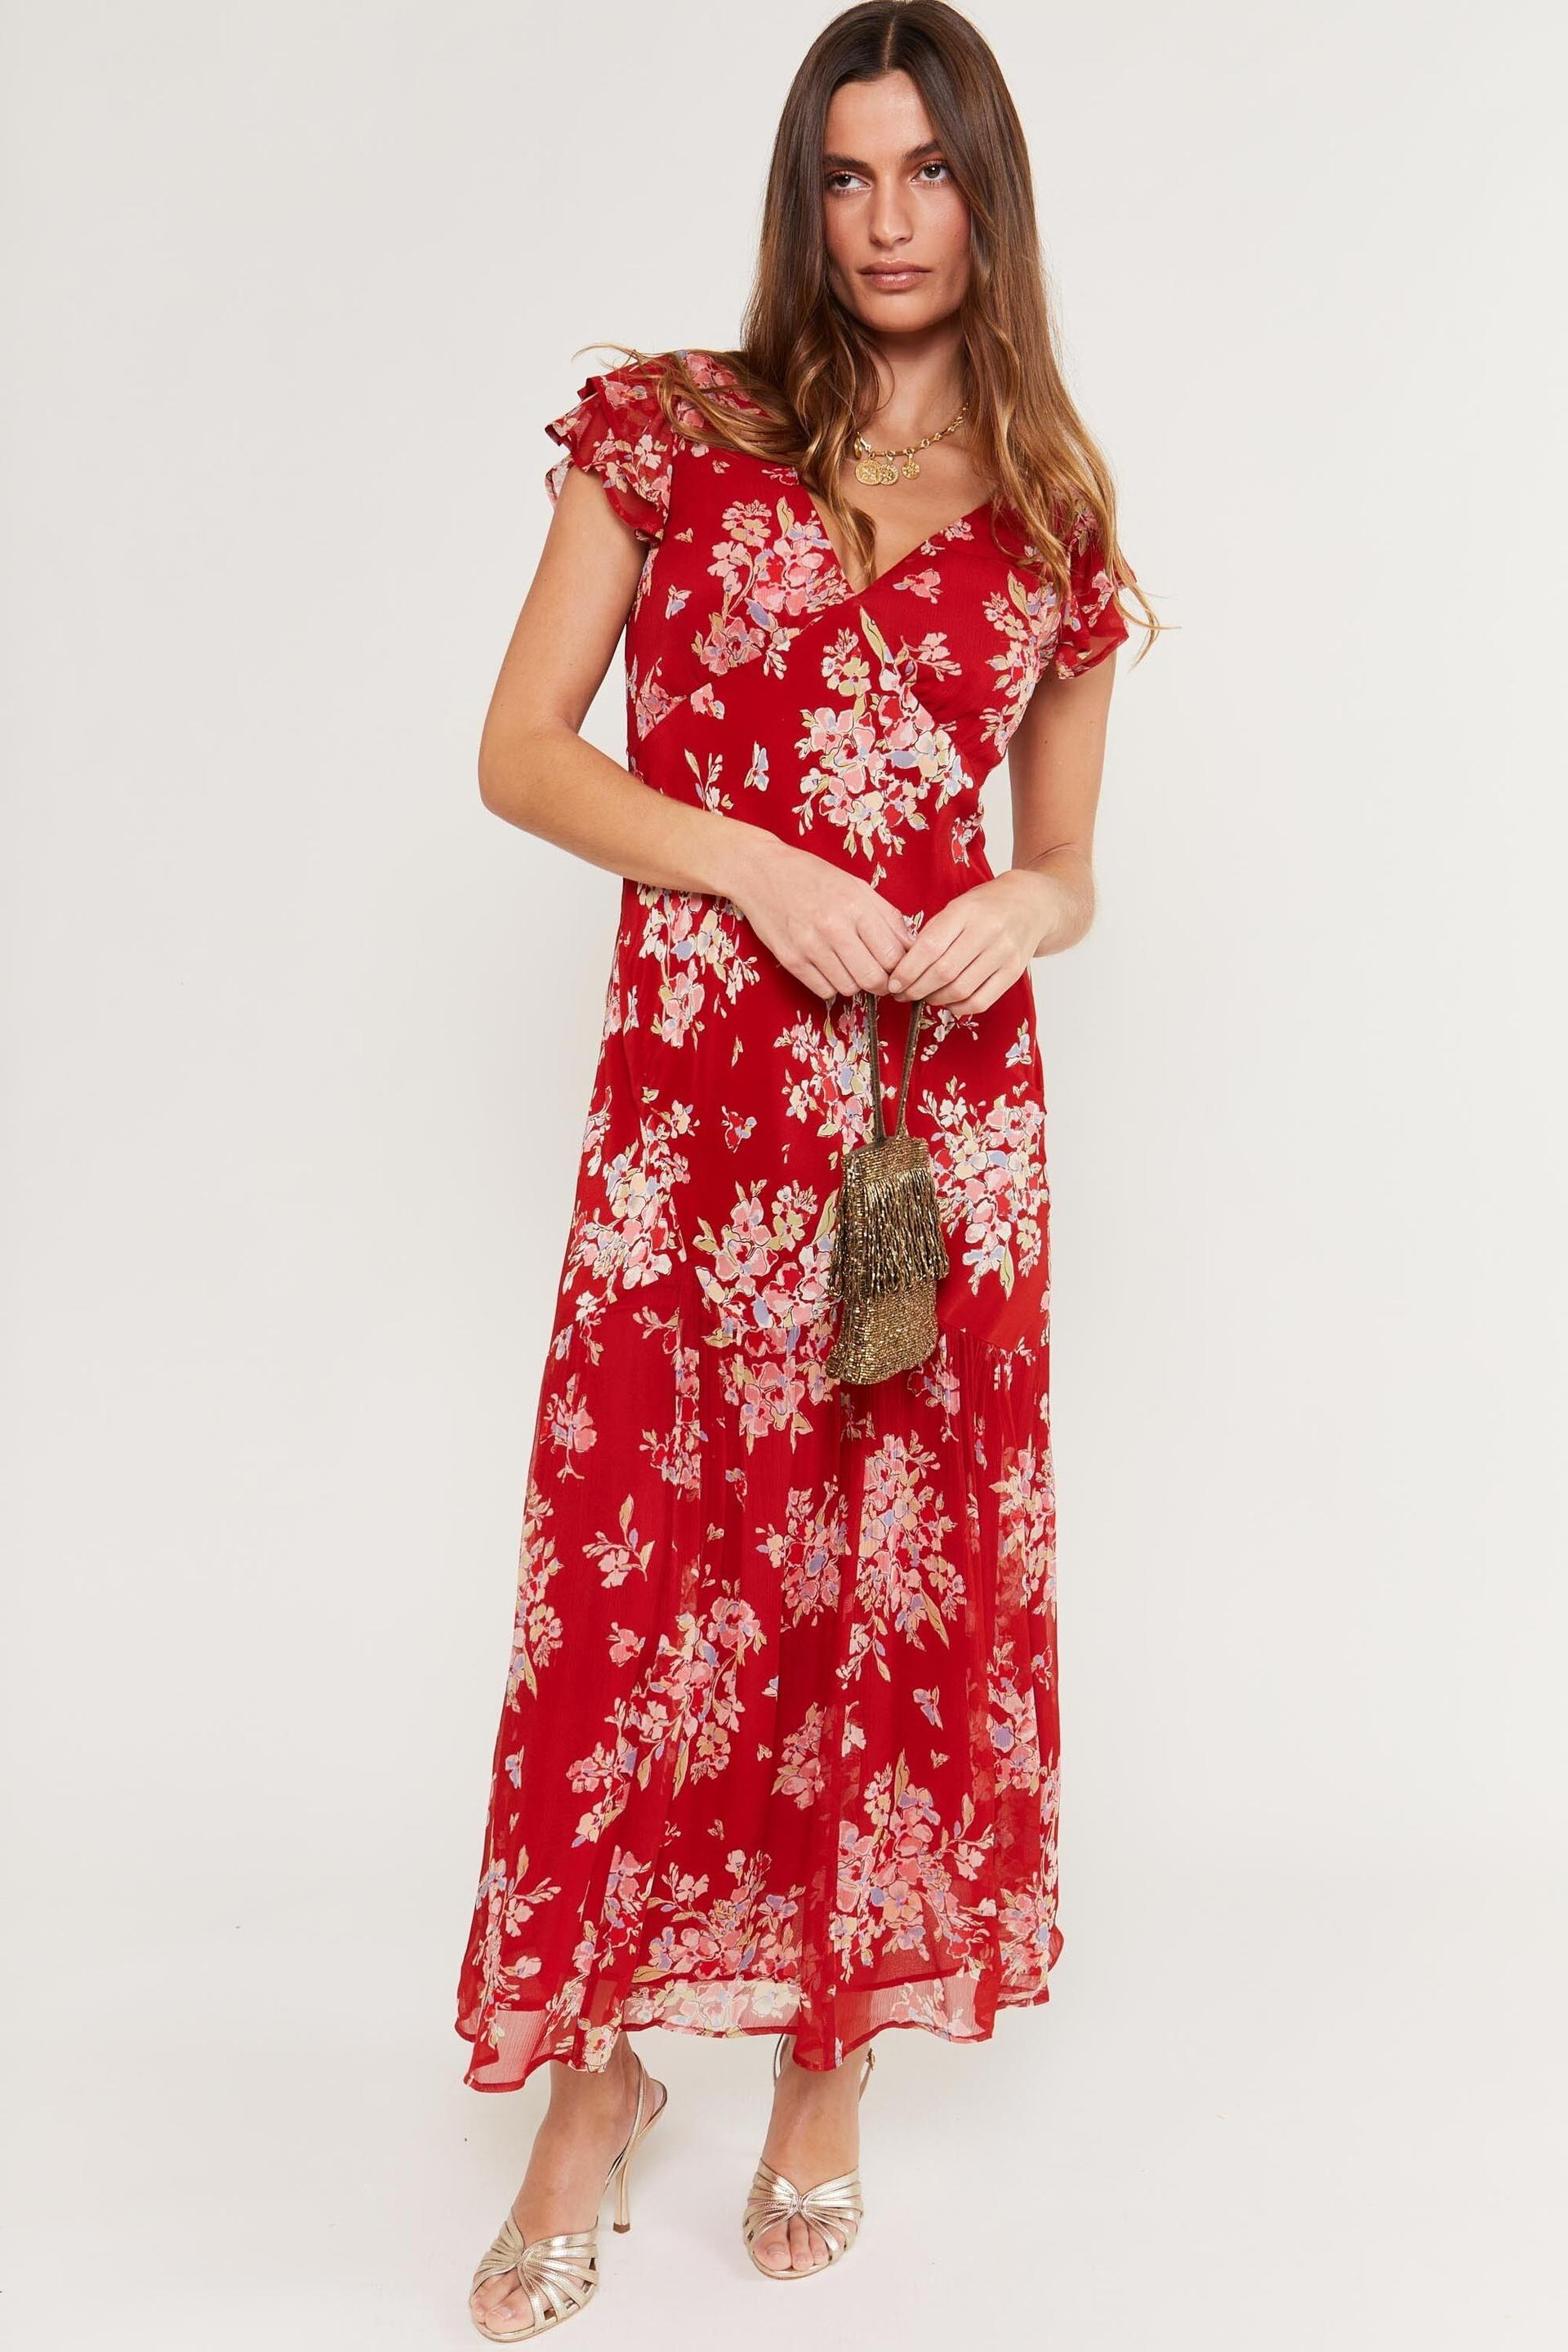 44 Stunning Wedding Guest Dresses & Outfits for 2024 - hitched.co.uk